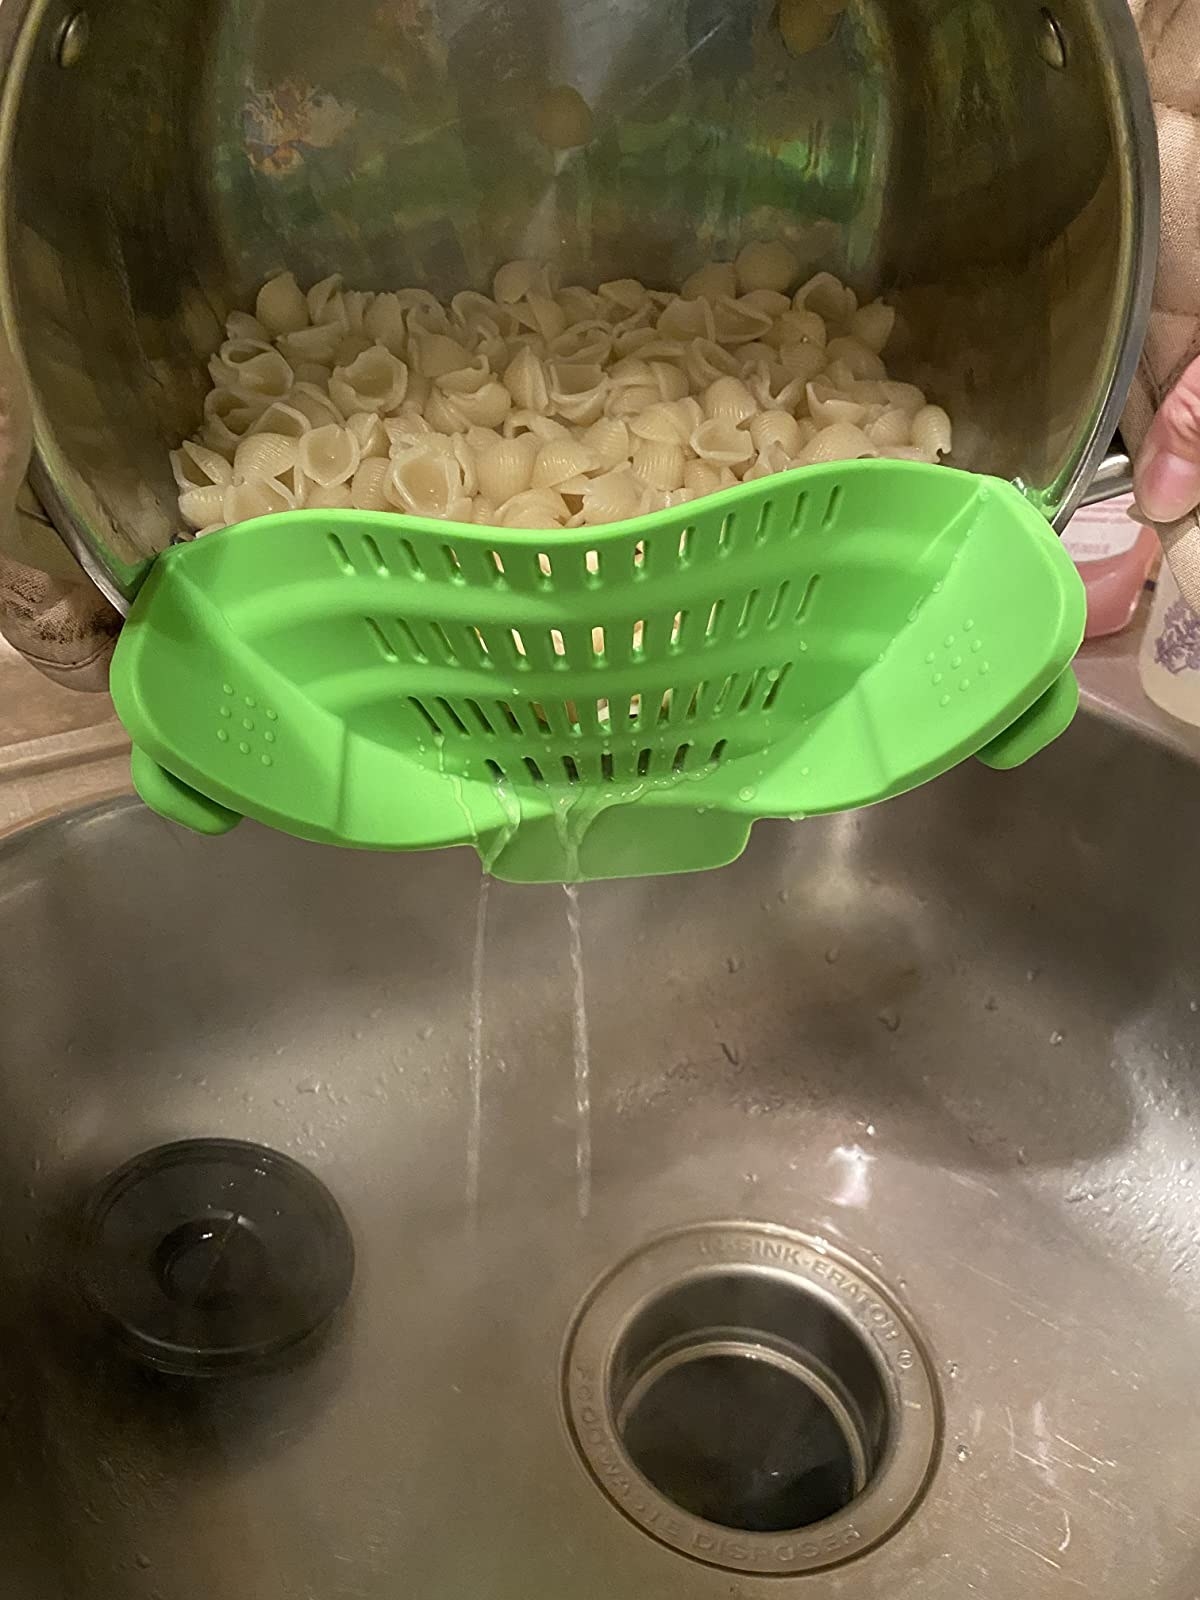 The colander clipped to the edge of a pot, draining water into a sink